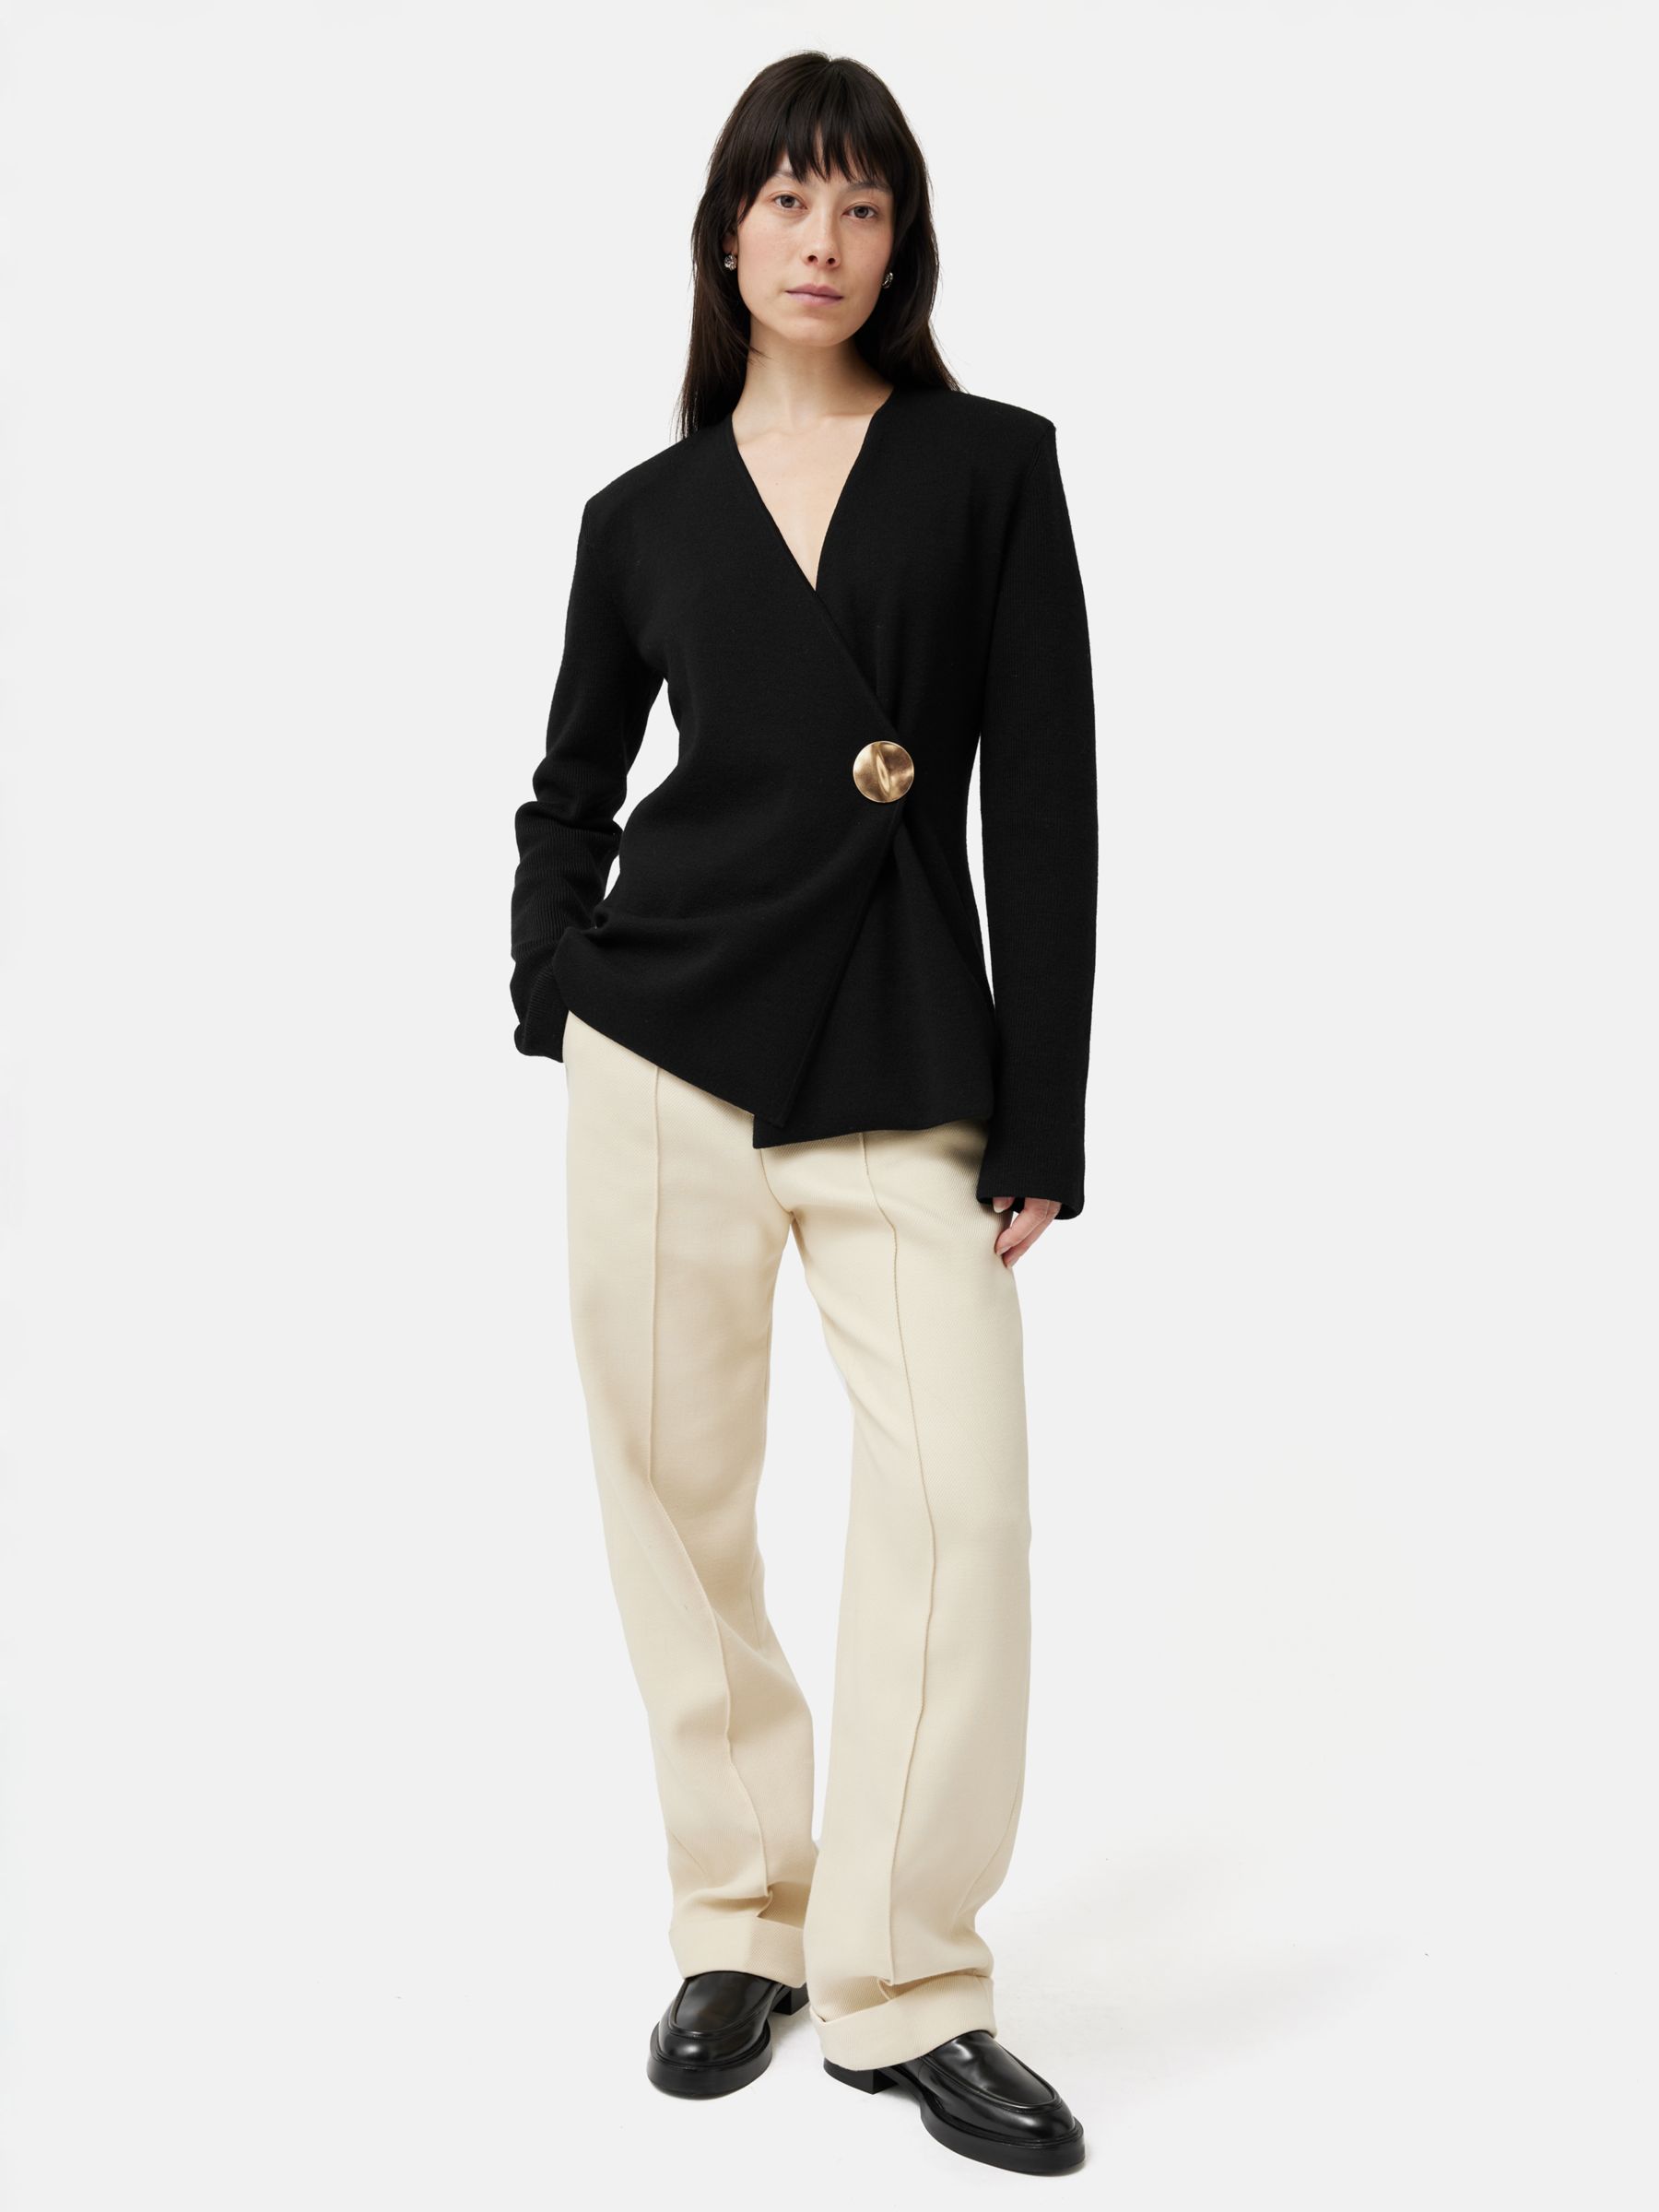 Buy Jigsaw Milano Gold Disc Knitted Jacket, Black Online at johnlewis.com